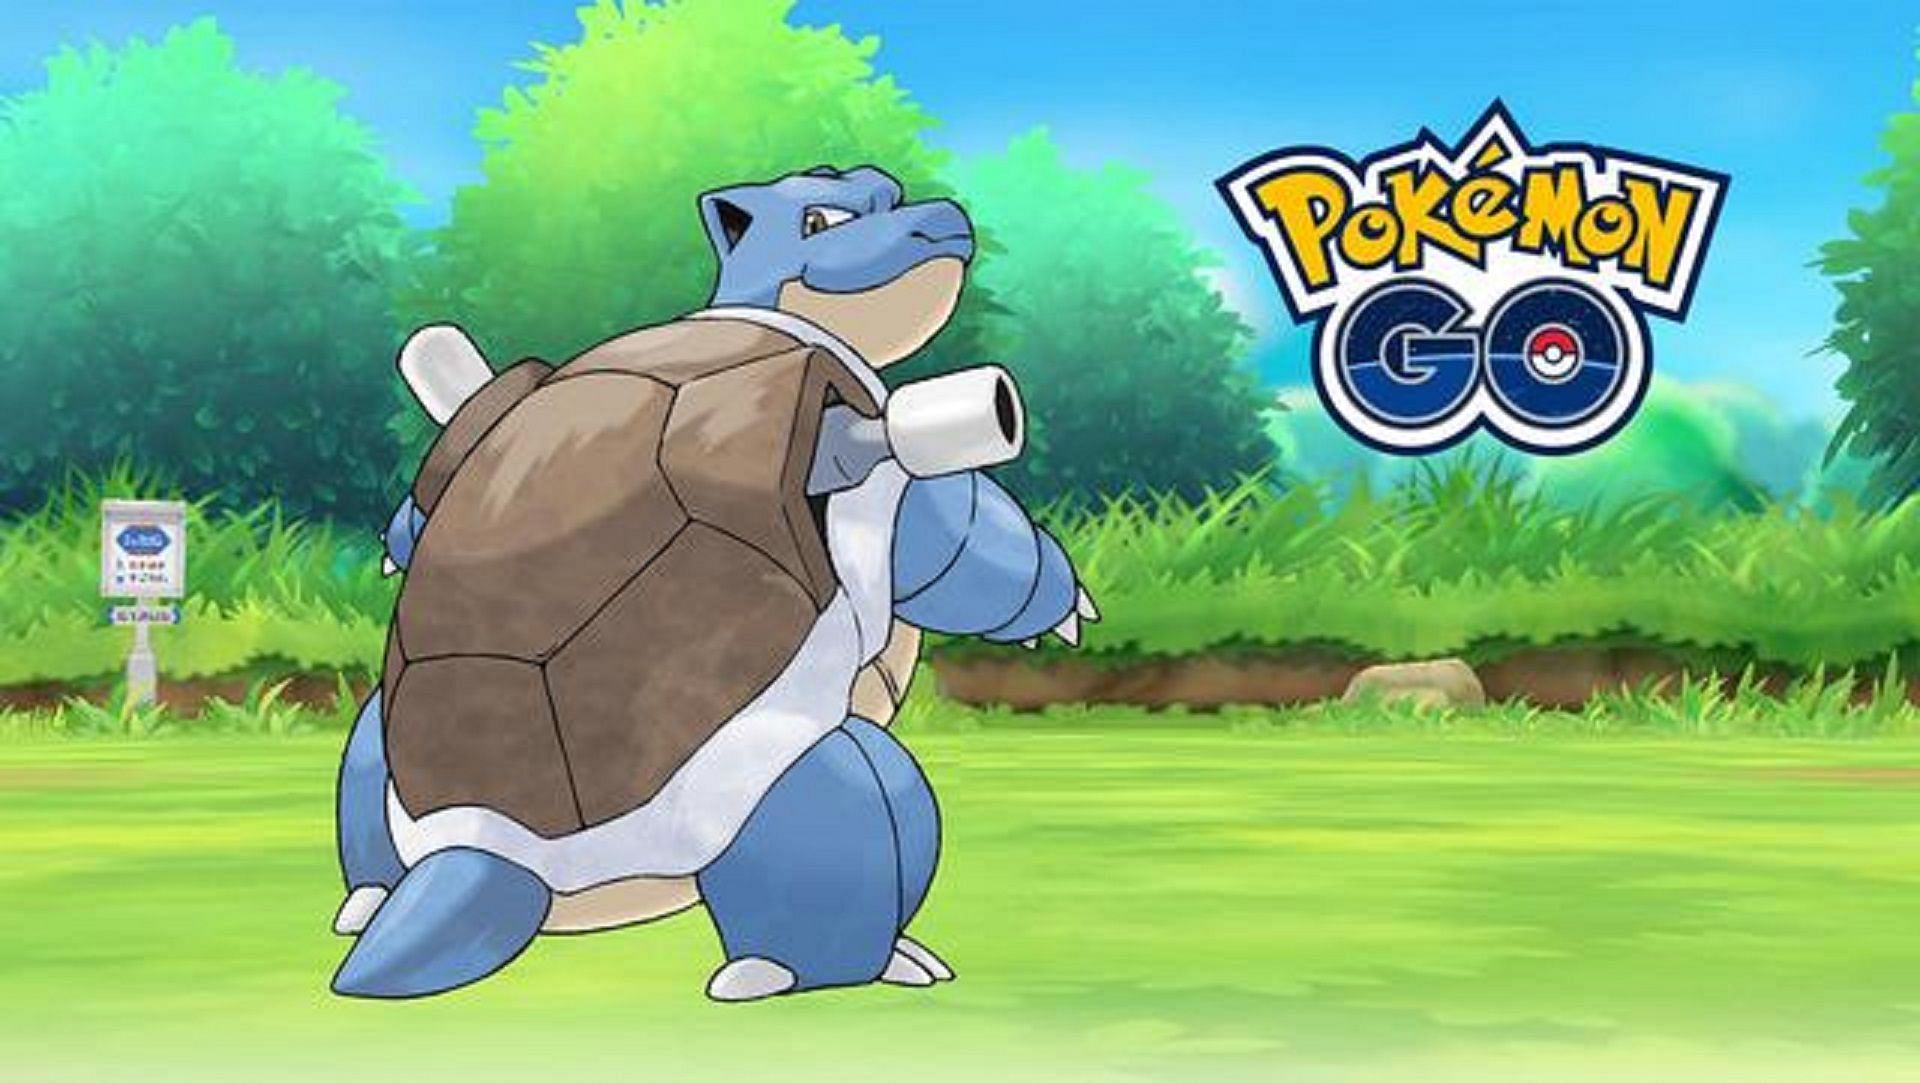 Blastoise is the final evolution of Squirtle, one of the Kanto region